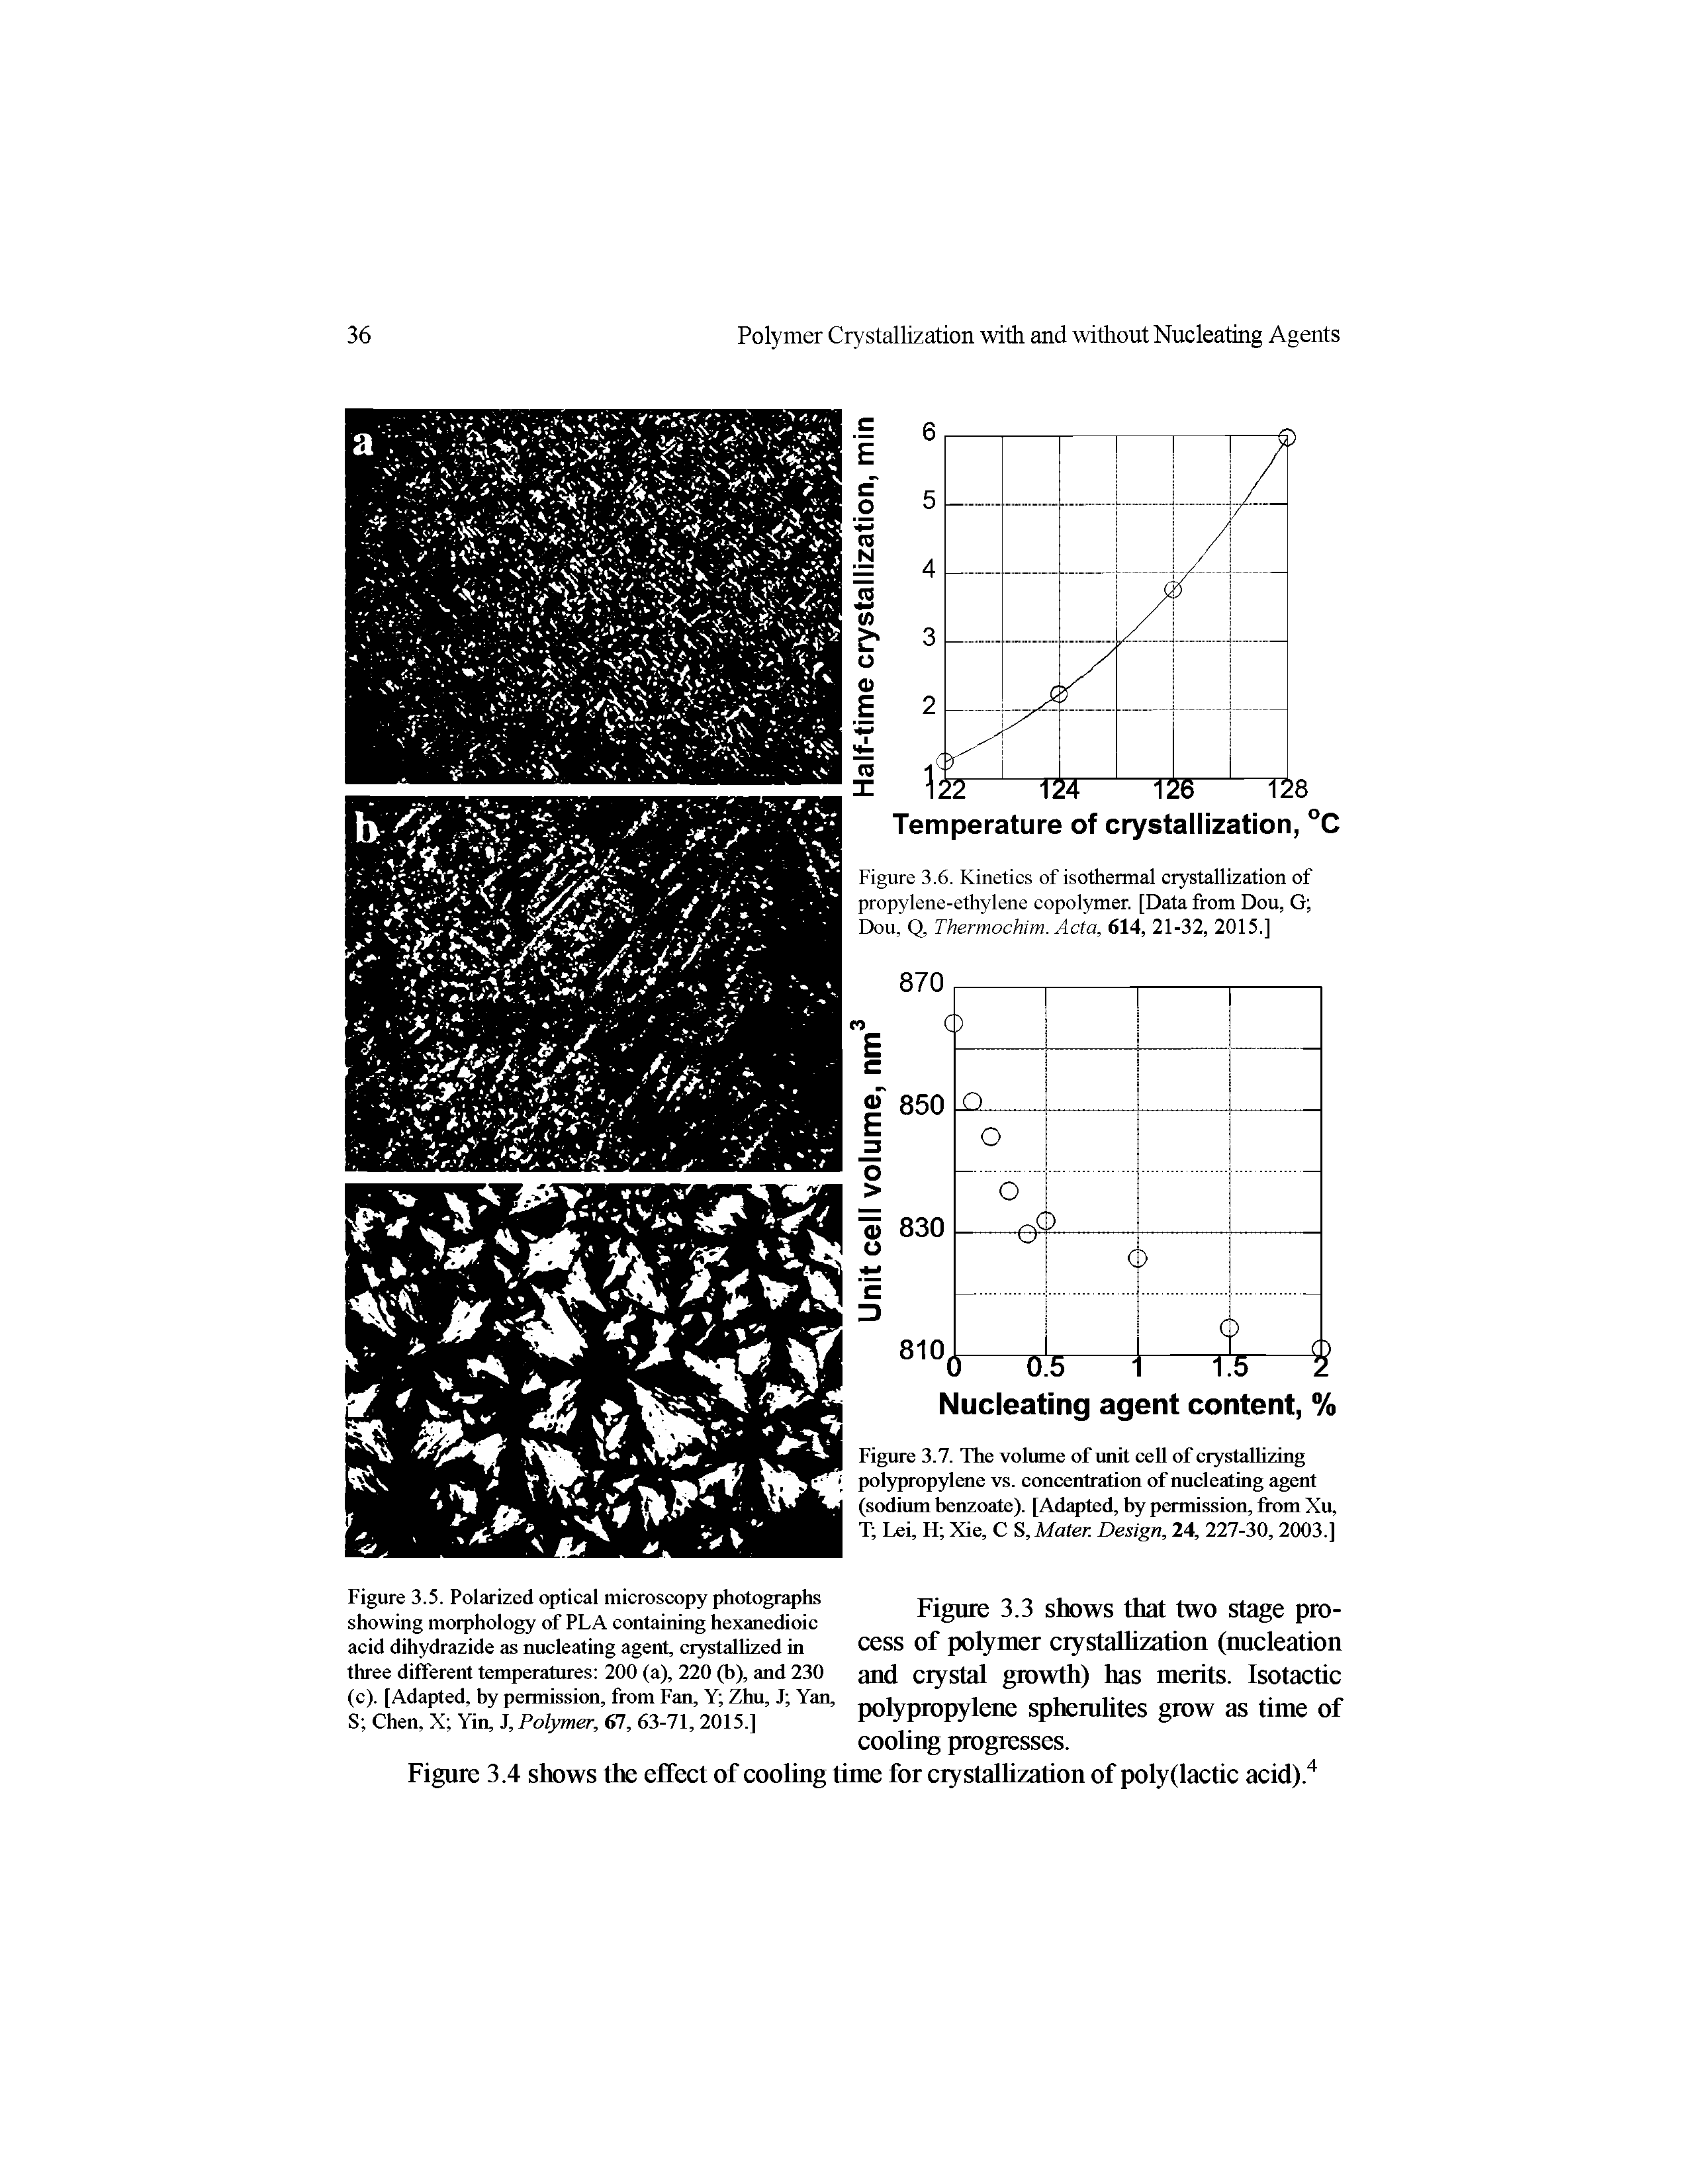 Figure 3.7. The volume of unit cell of crystallizing polypropylene vs. concentration of nucleating agent (sodium benzoate). [Adapted, by permission, from Xu, T Lei, H Xie, C S, Mater. Design, 24, 227-30,2003.]...